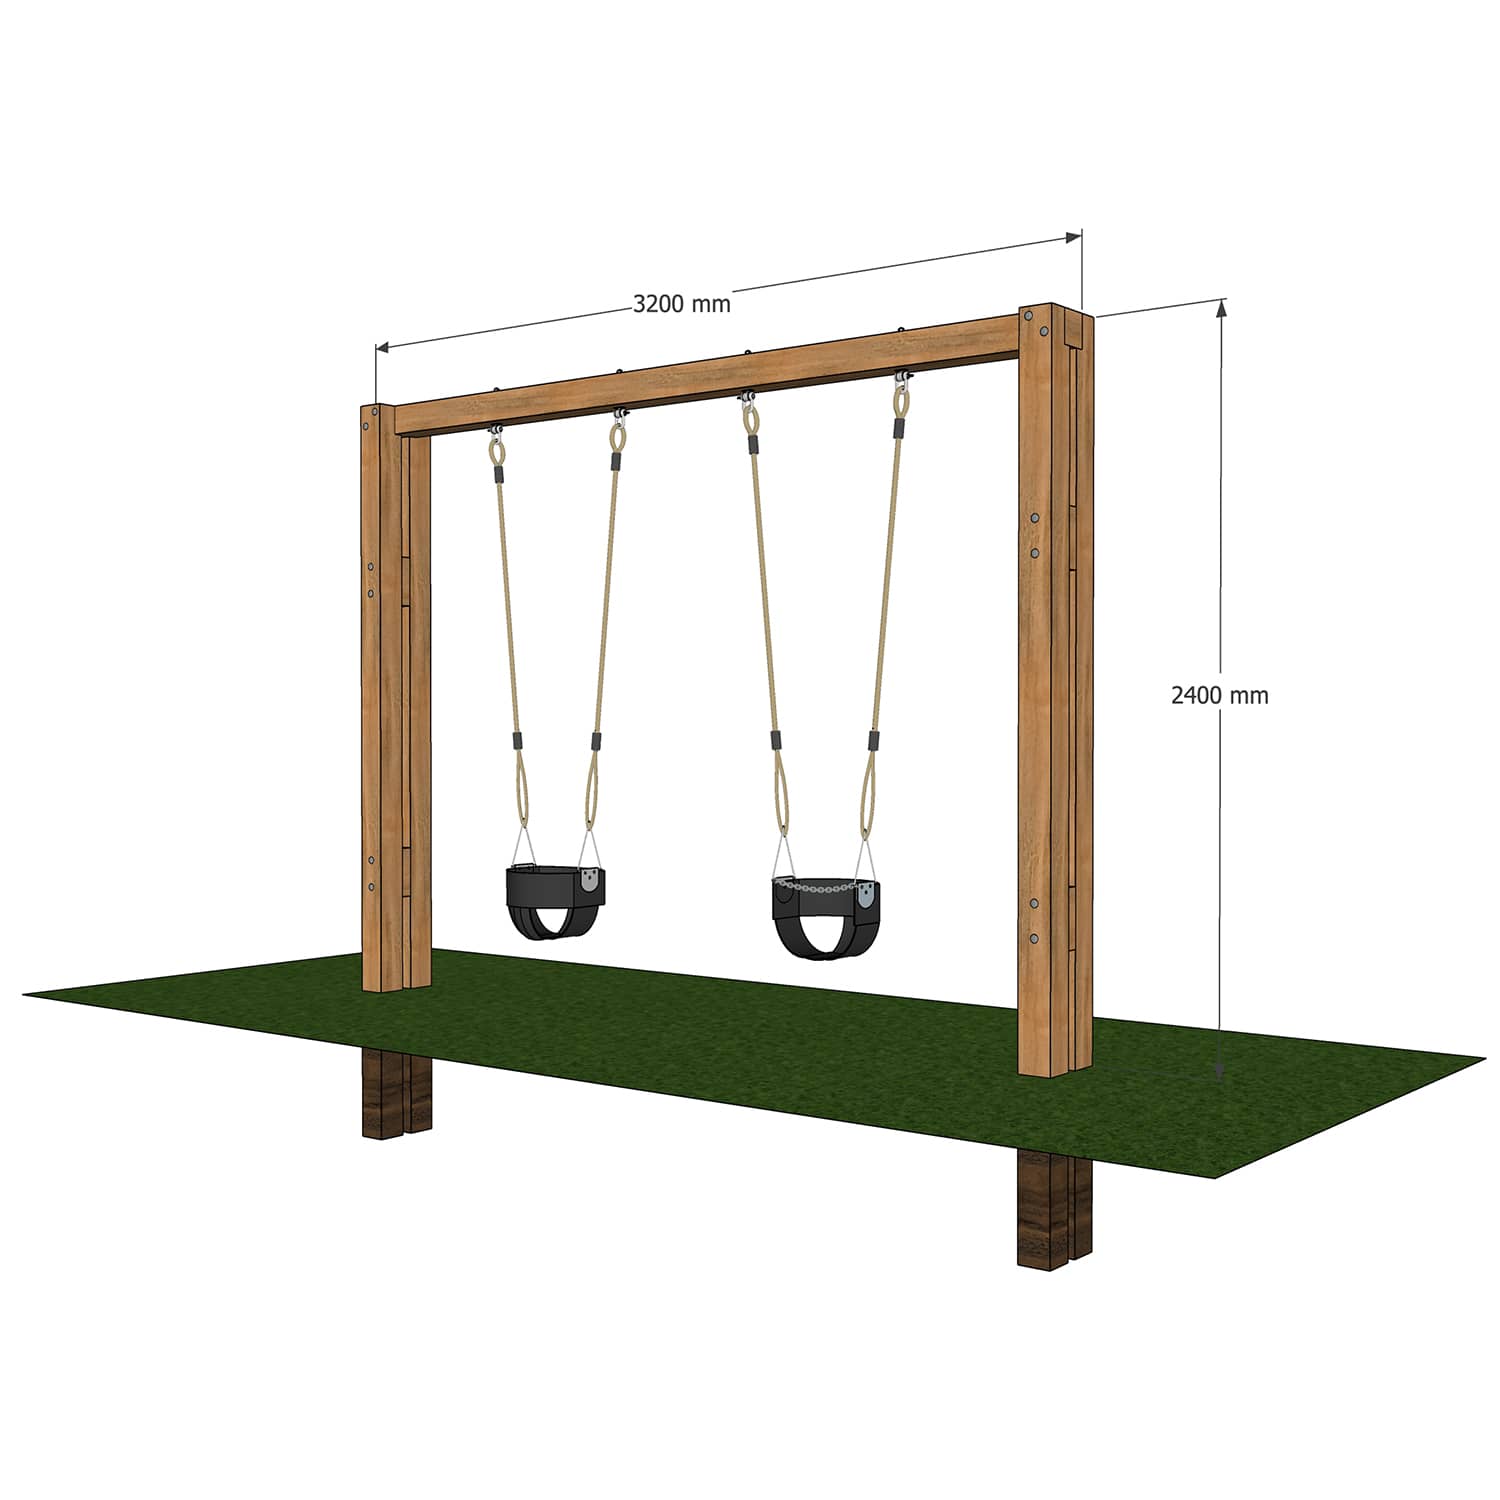 Outdoor timber swing set with 1 full bucket and 1 half bucket seats.